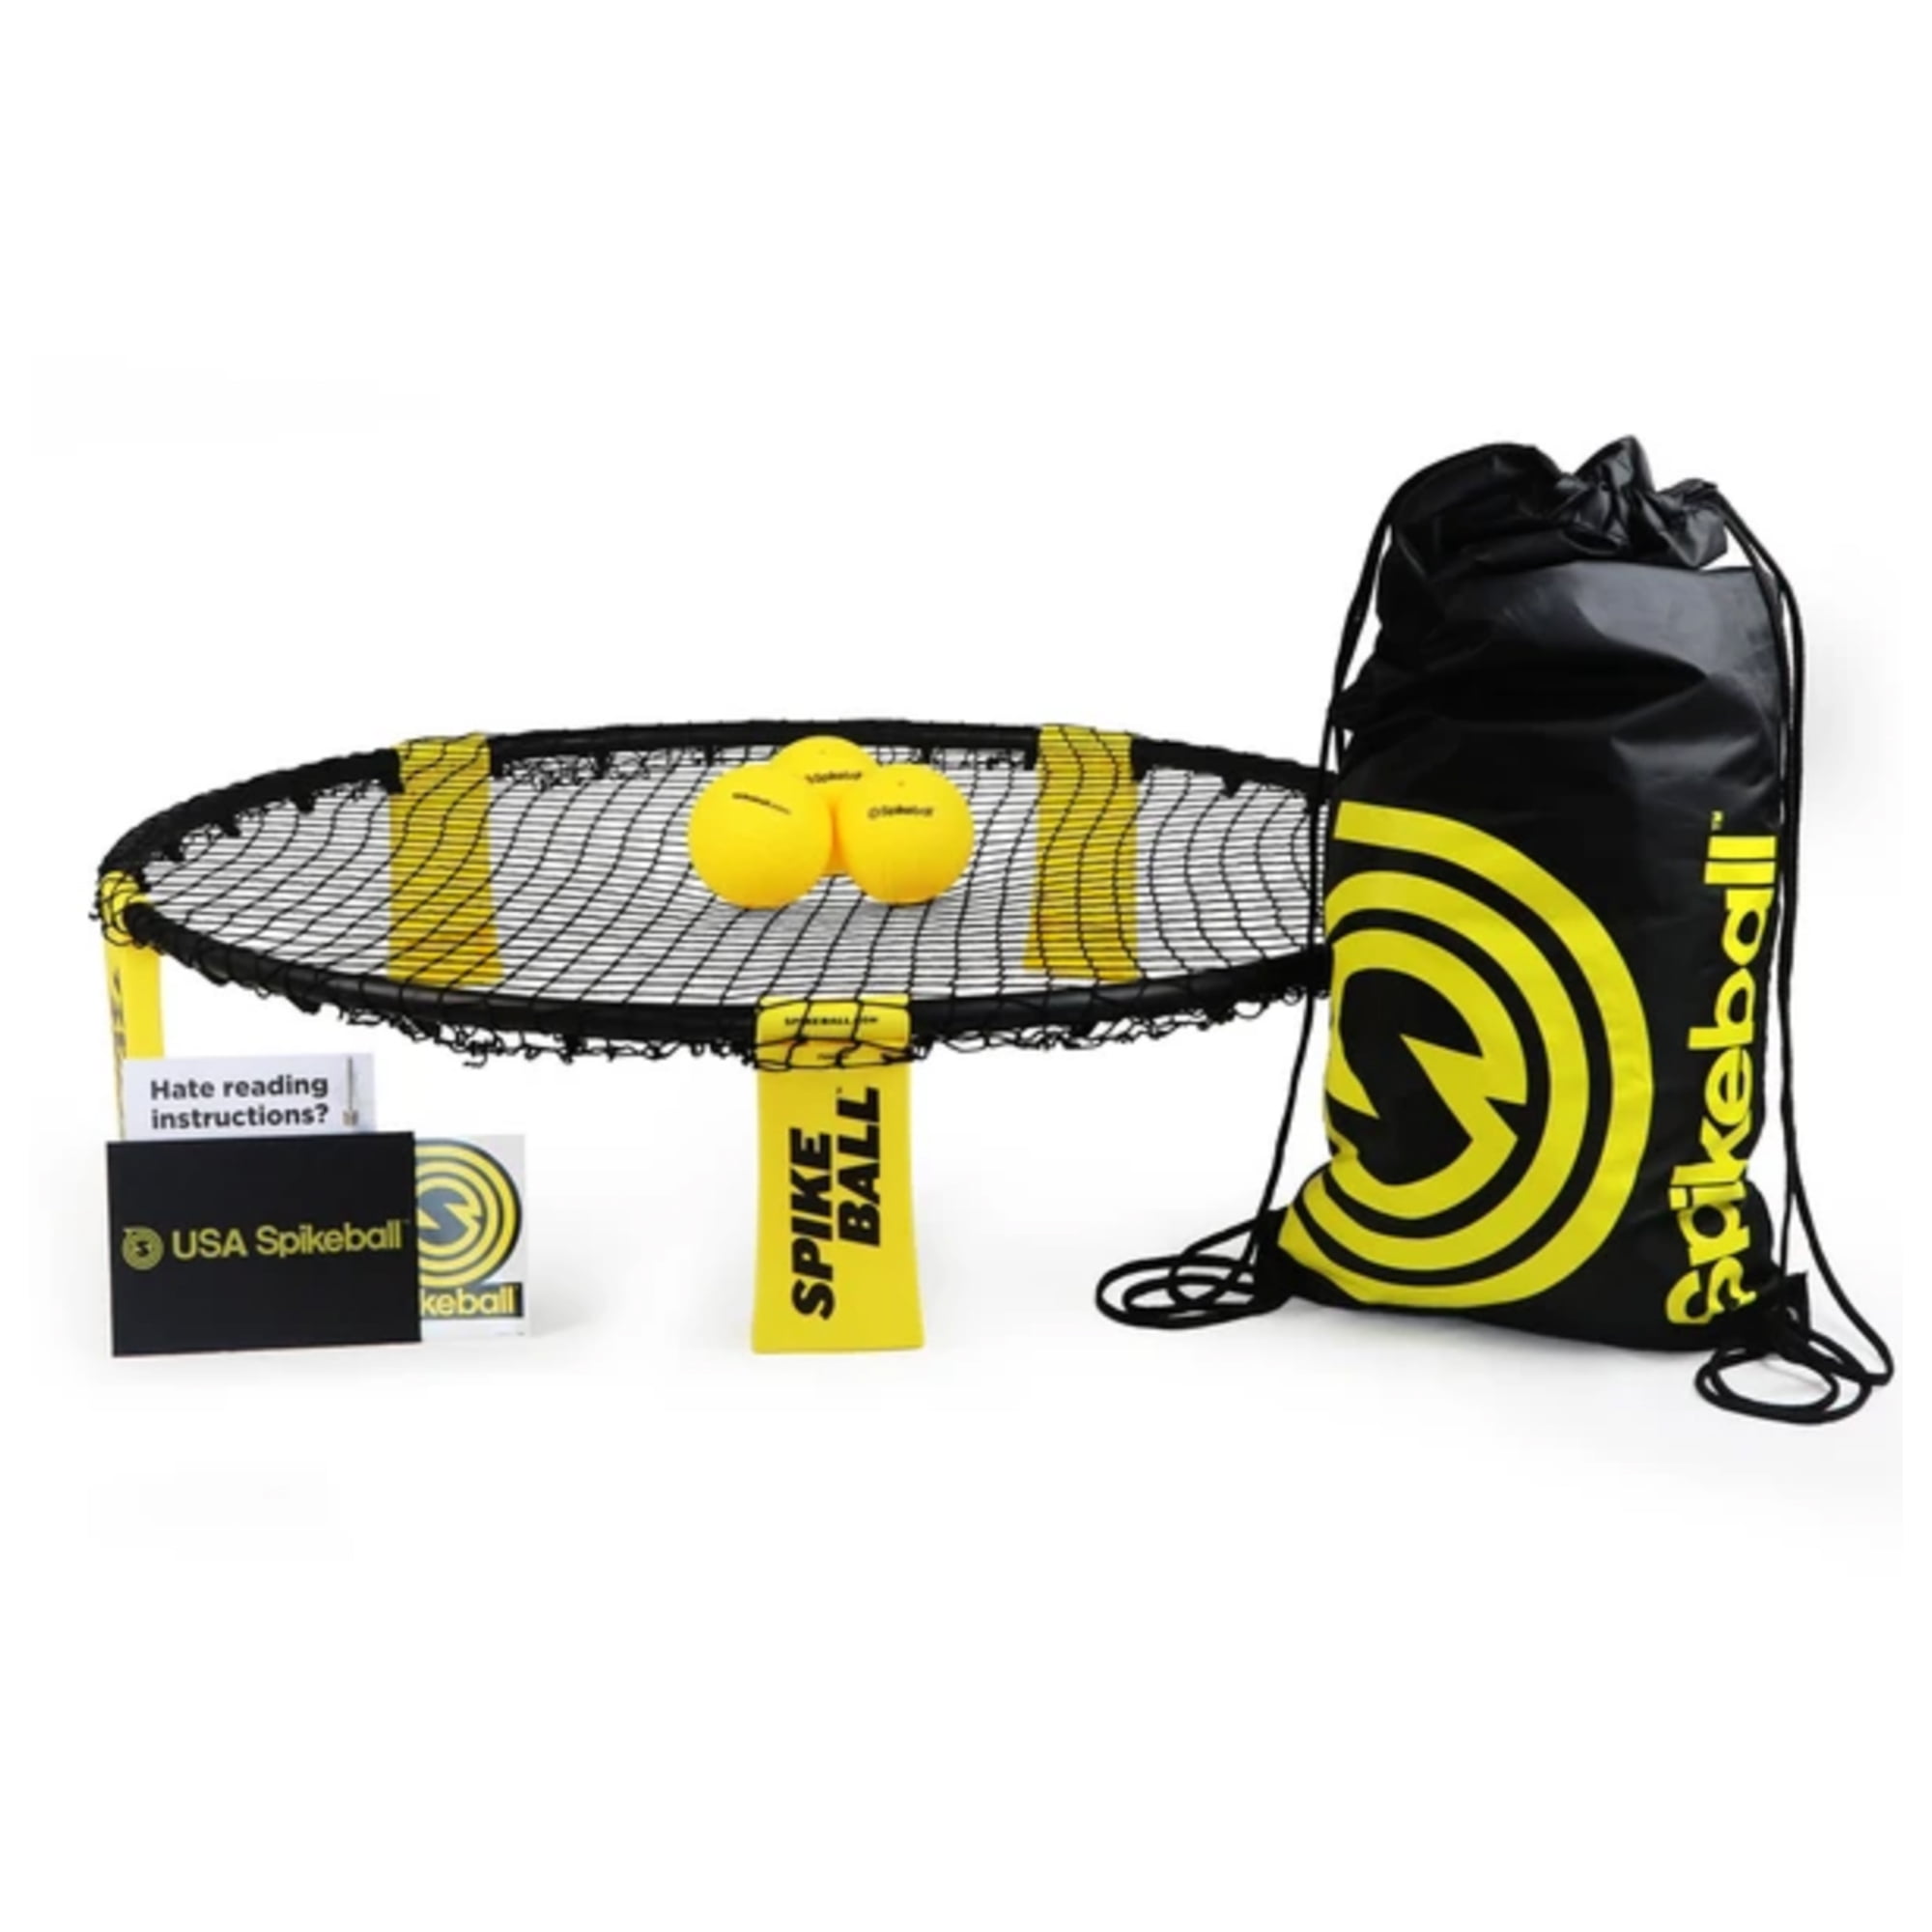 Spikeball Pro Kit Tournament Edition for sale online 